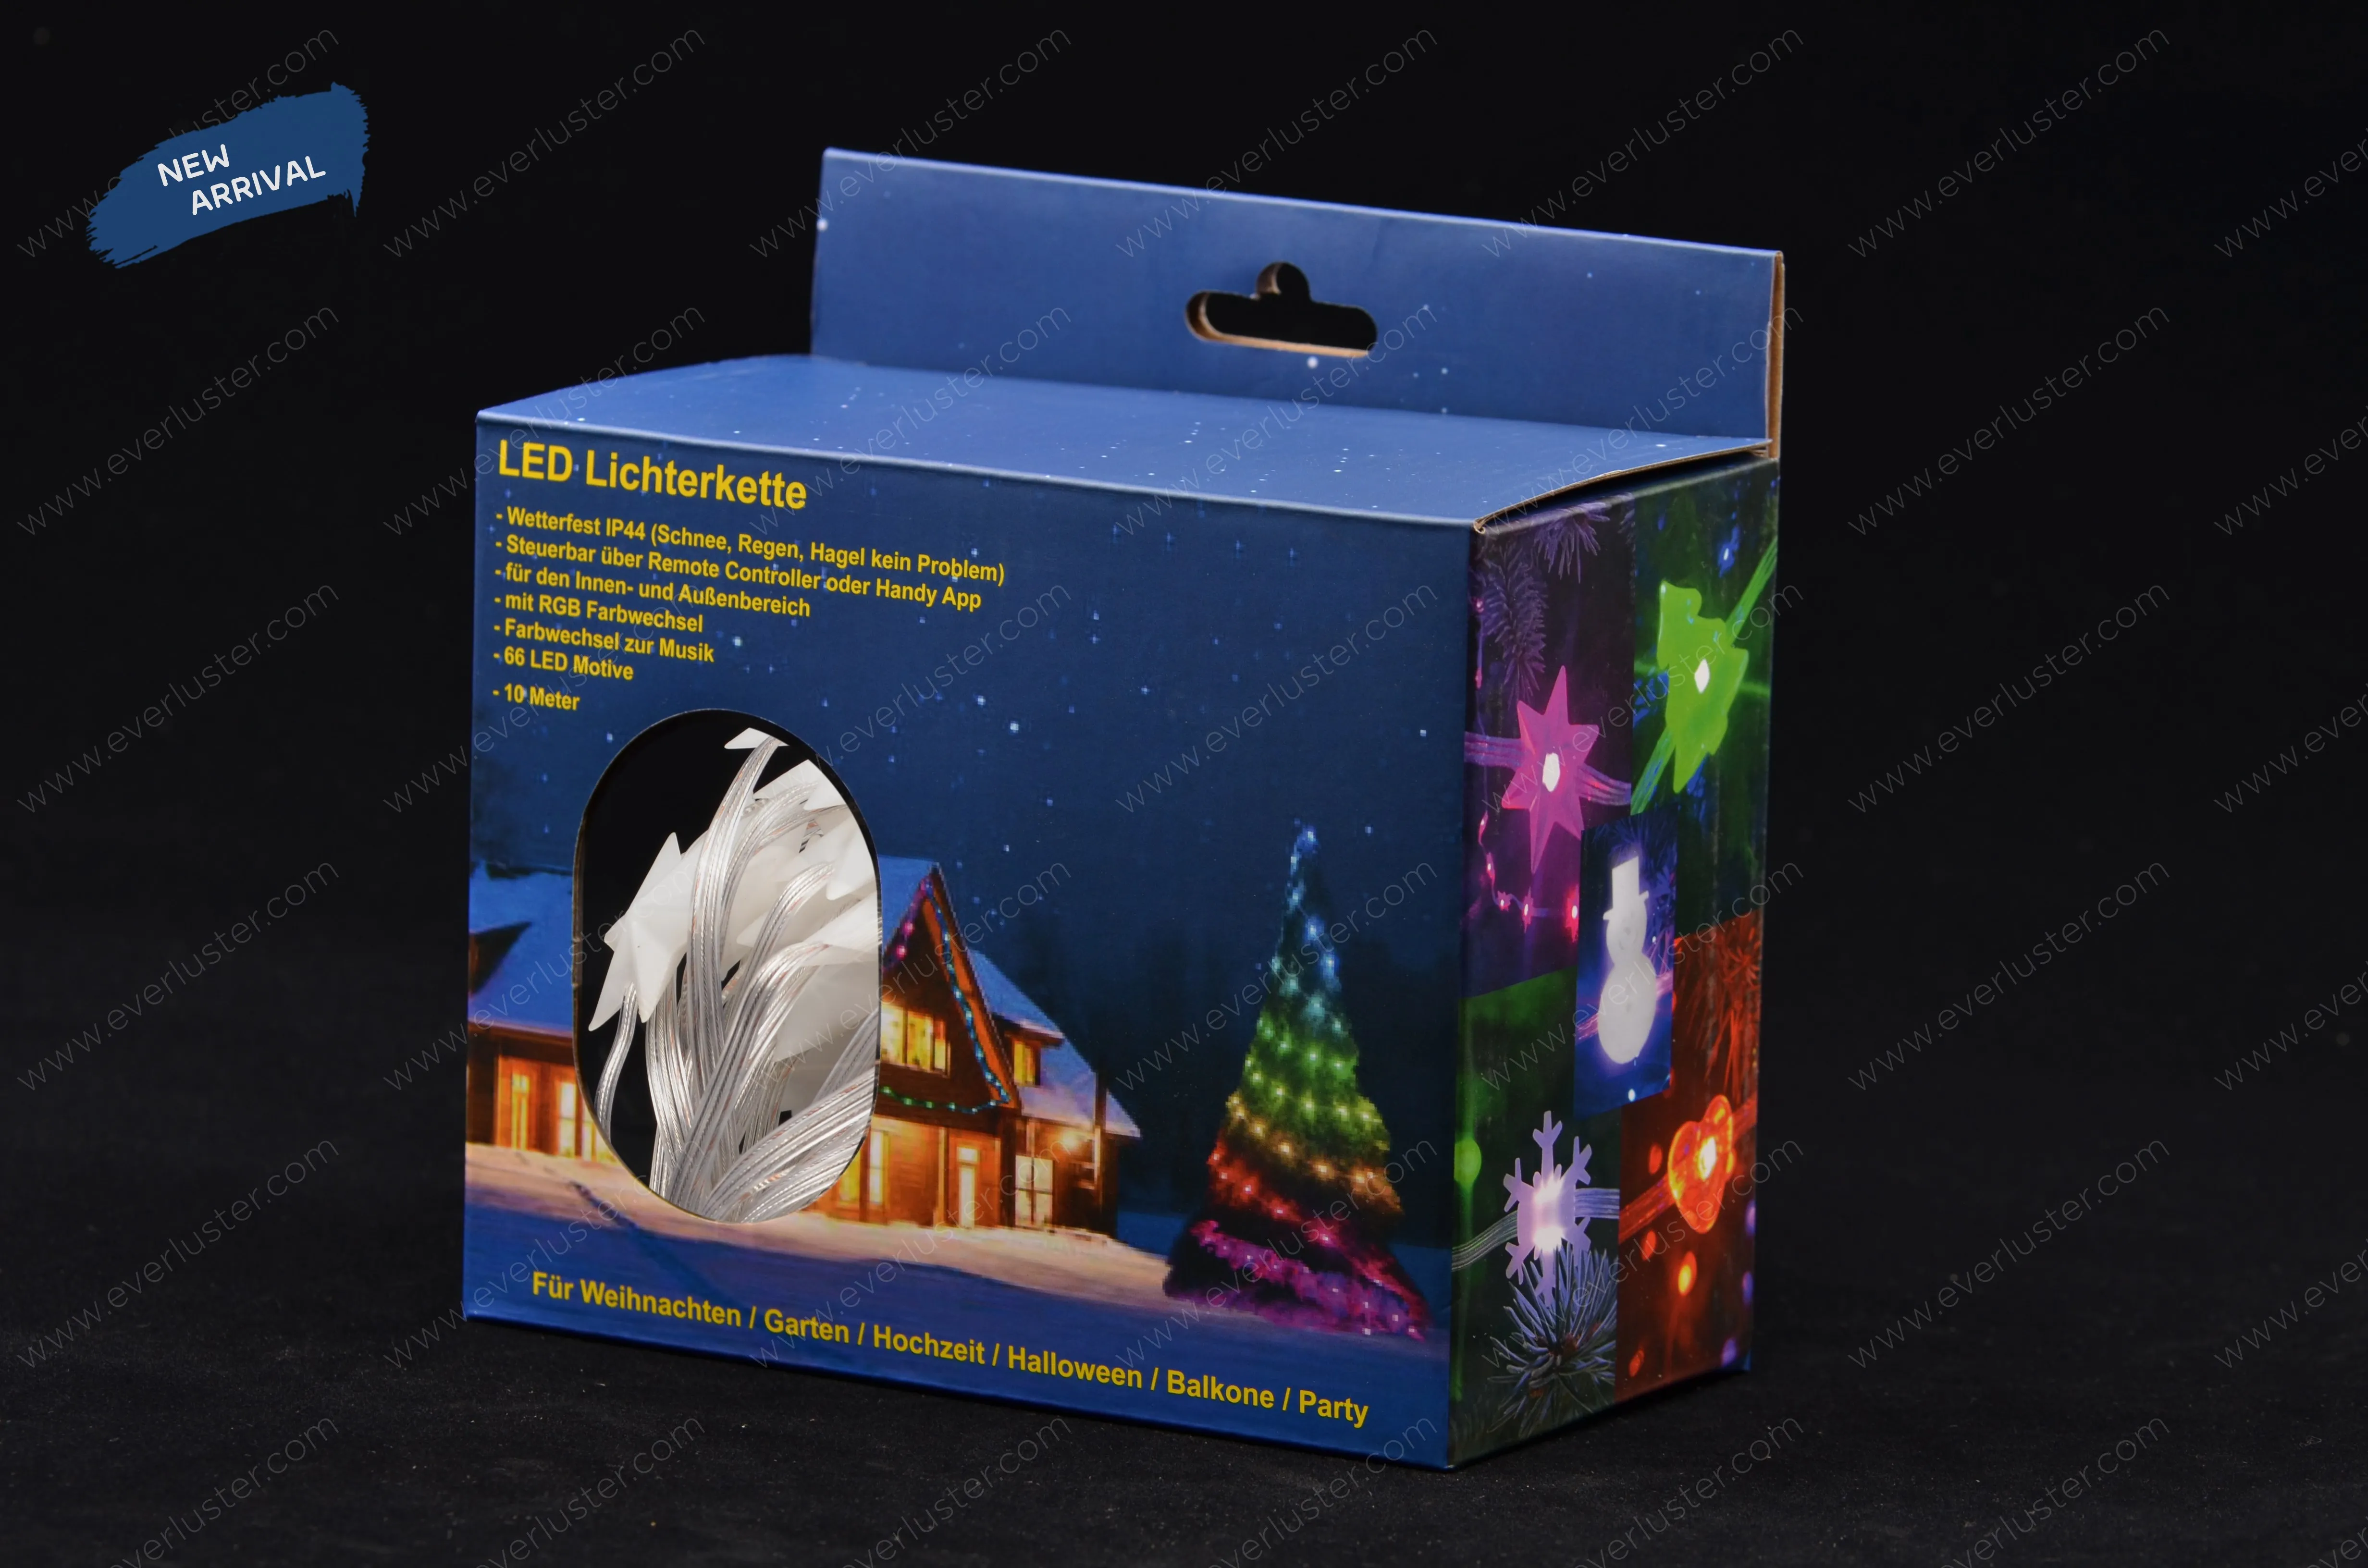 USB christmas string lights white RGB color to decorate house.